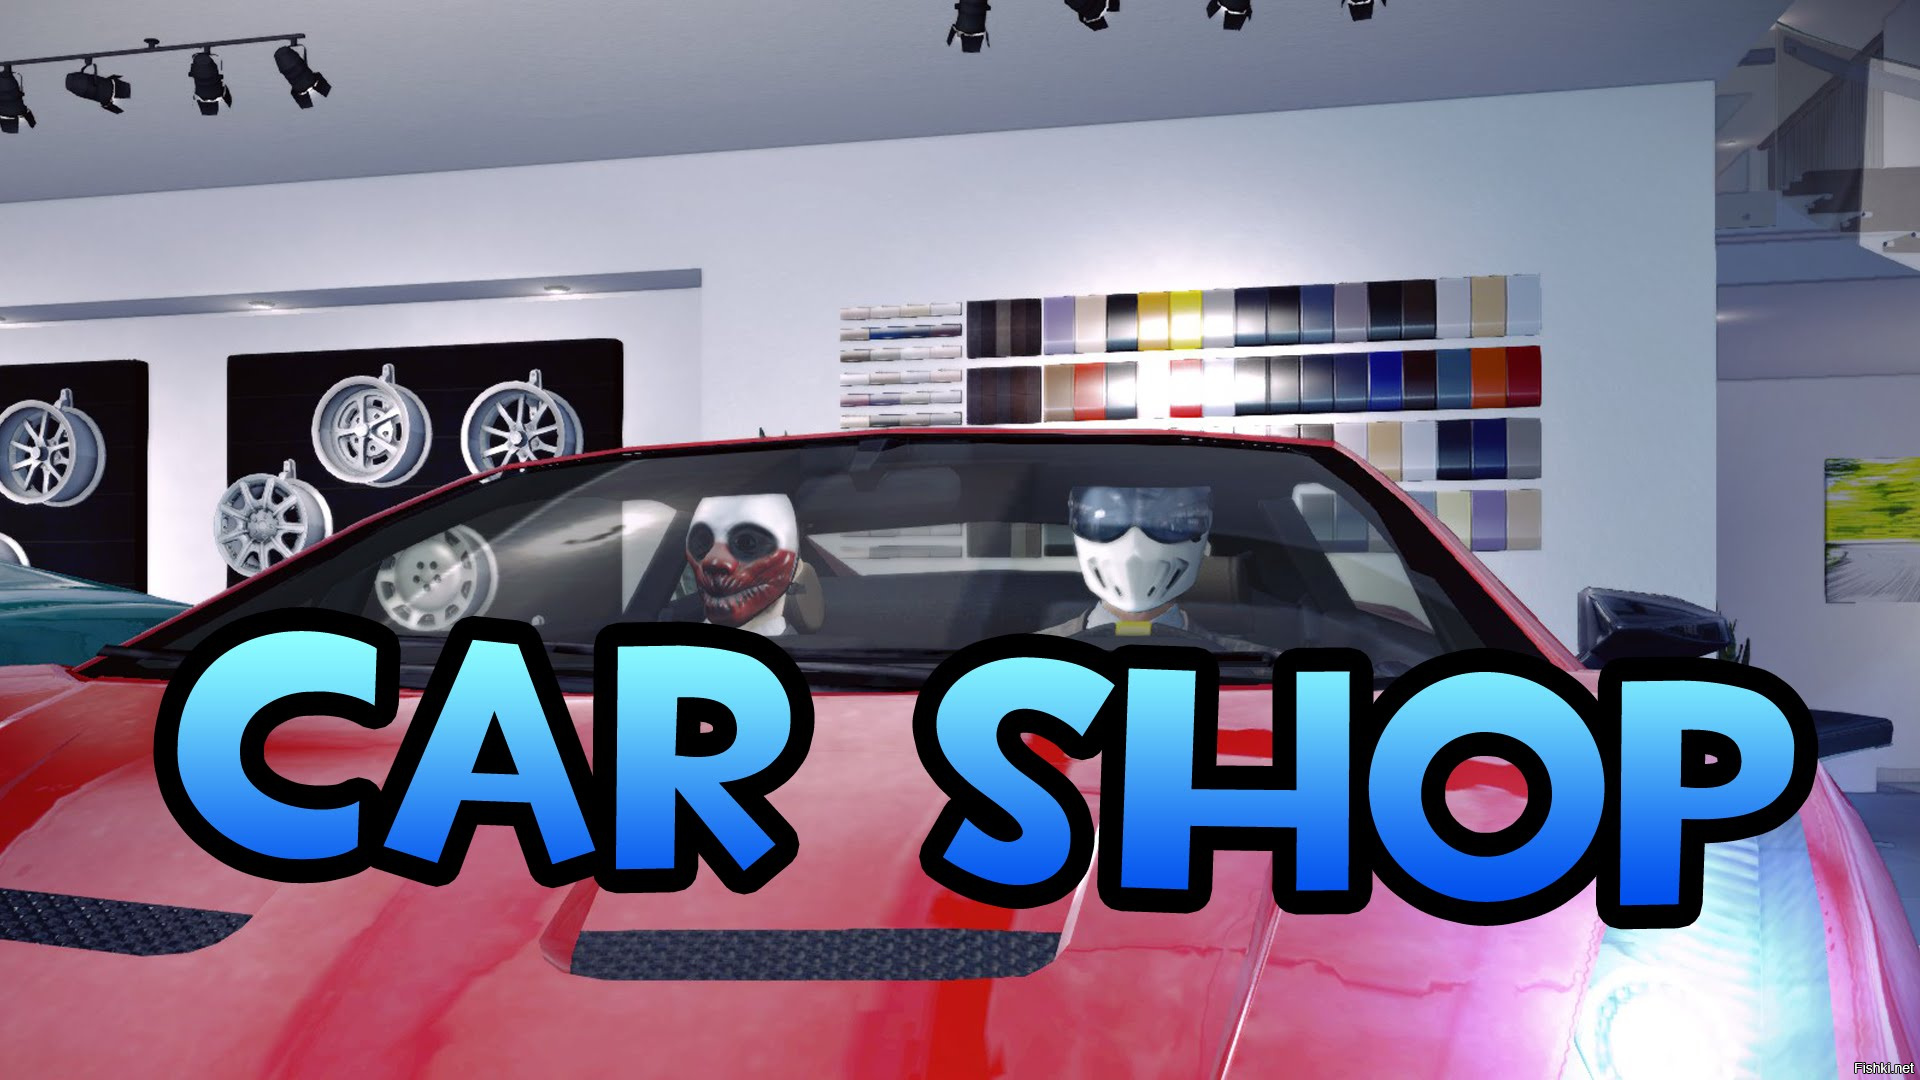 That is car in the shop. Payday 2 автосалон. Car shop игра. Payday 2 car shop. Пейдей 2 автосалон менеджер.